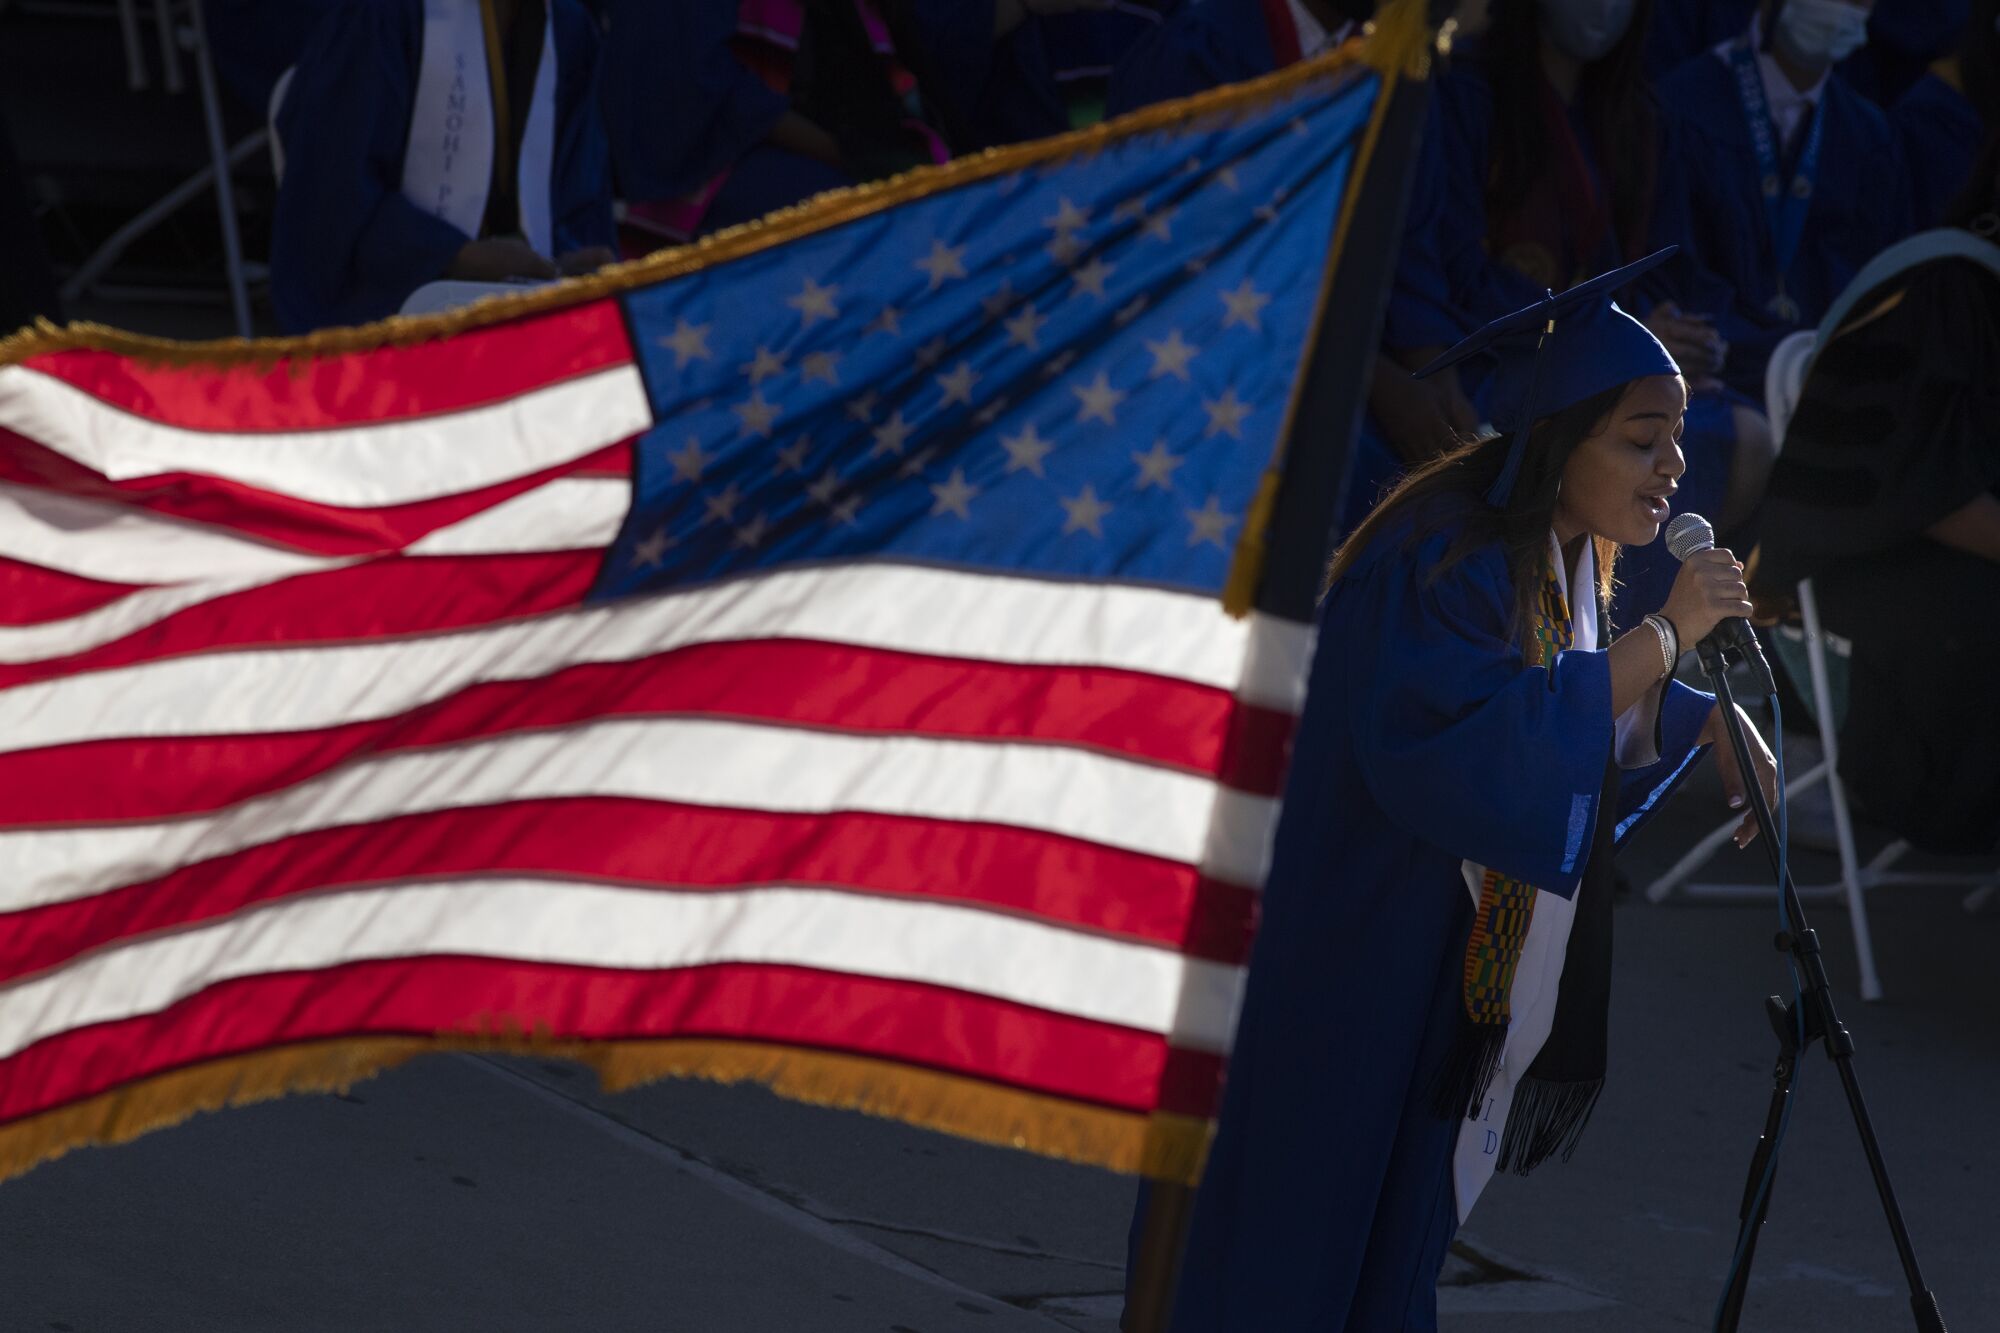 A student in cap and gown sings next to a U.S. flag.